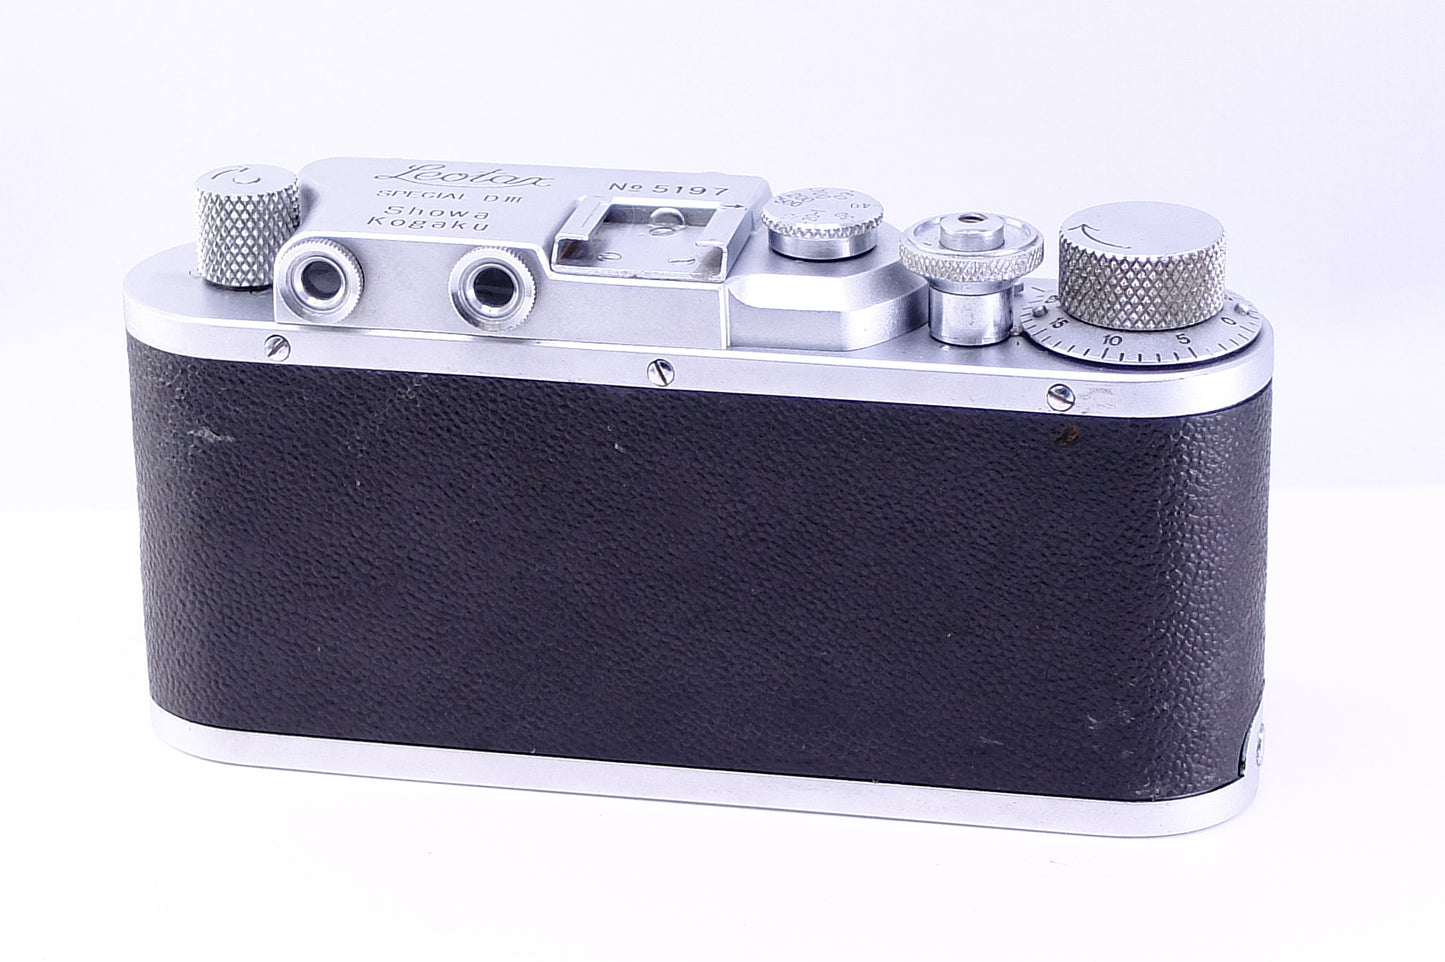 Leotax Special DIII (made in Occupied Japan) + C.Simlar 50mm F3.5 [1194485503013]